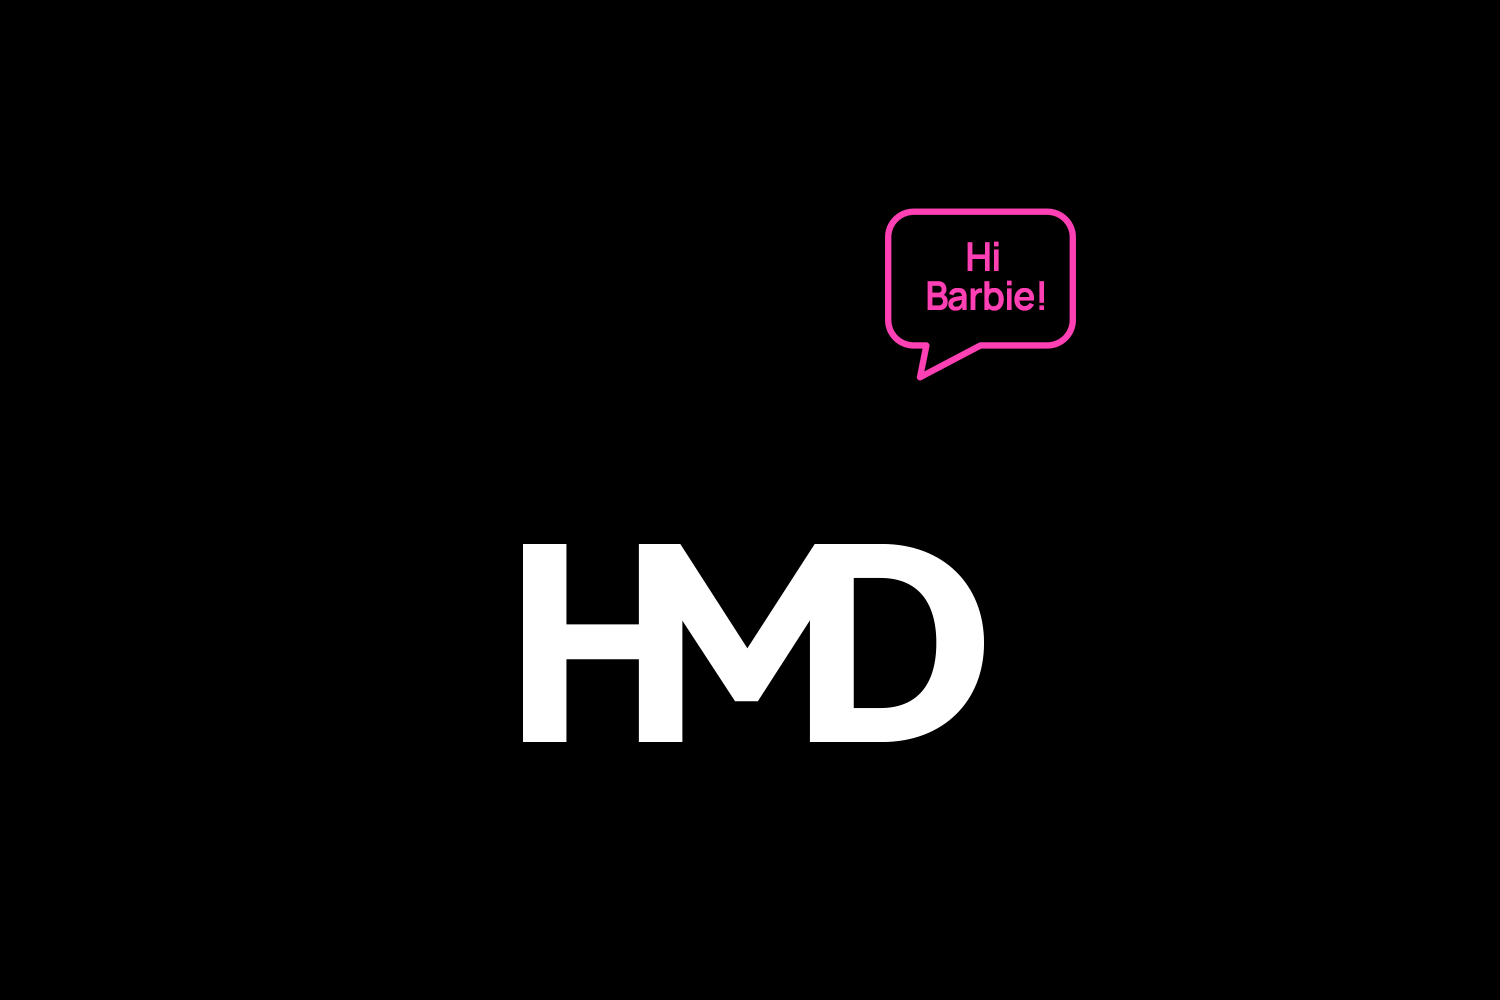 A promotional image for HMD Global and Mattel’s brand partnership.